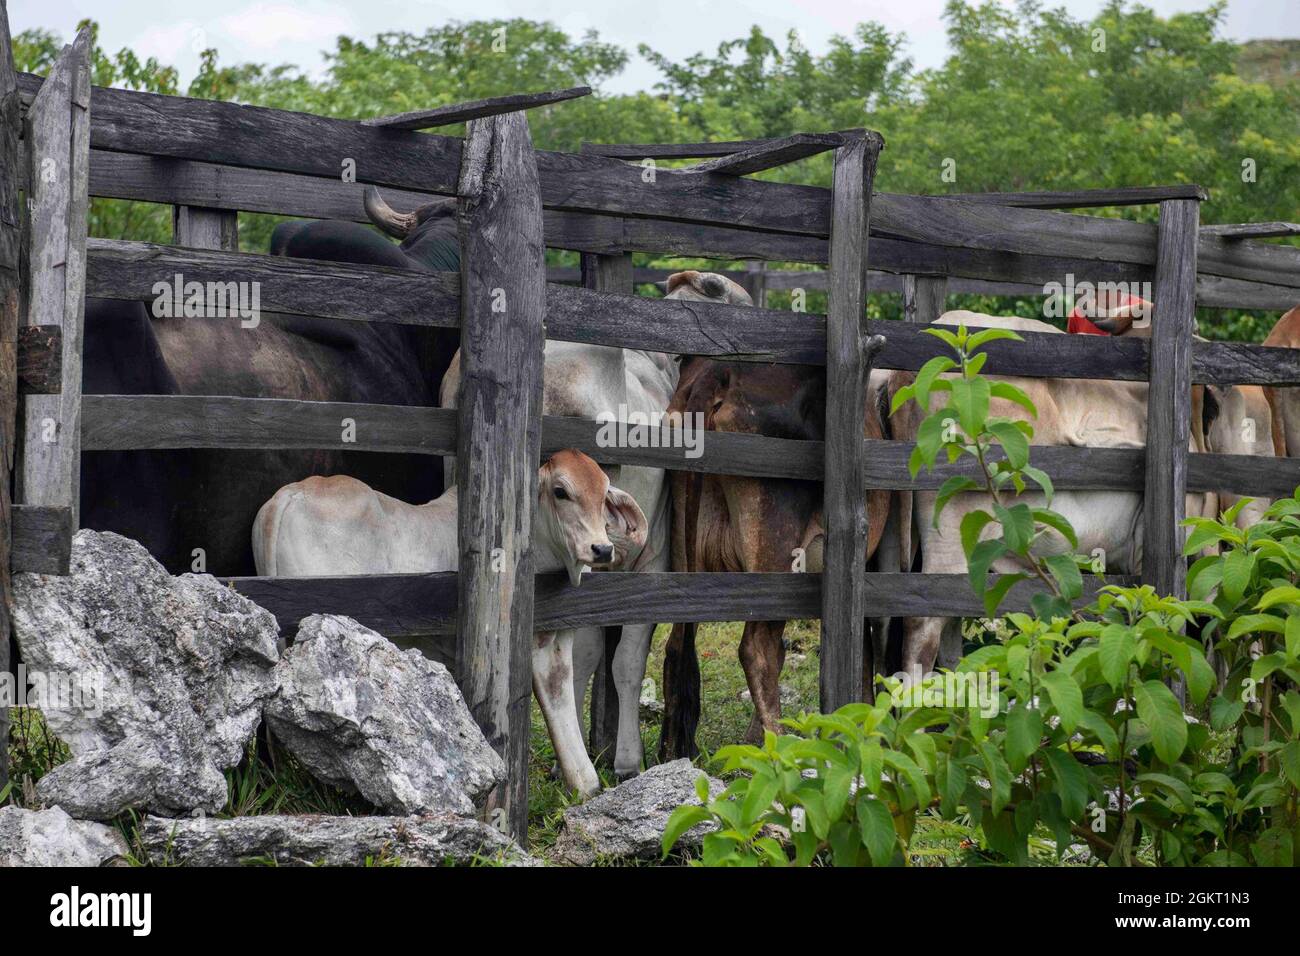 Cows are loaded into a cattle chute prior to being vaccinated by the Resolute Sentinel 21 veterinary team in Melchor De Mencos, Guatemala, June 24, 2021. U.S. military professionals from the 109th Medical Detachment Veterinary Services out of Garden Grove, California, will offer large animal care education and vaccinations at various locations during the exercise. Stock Photo